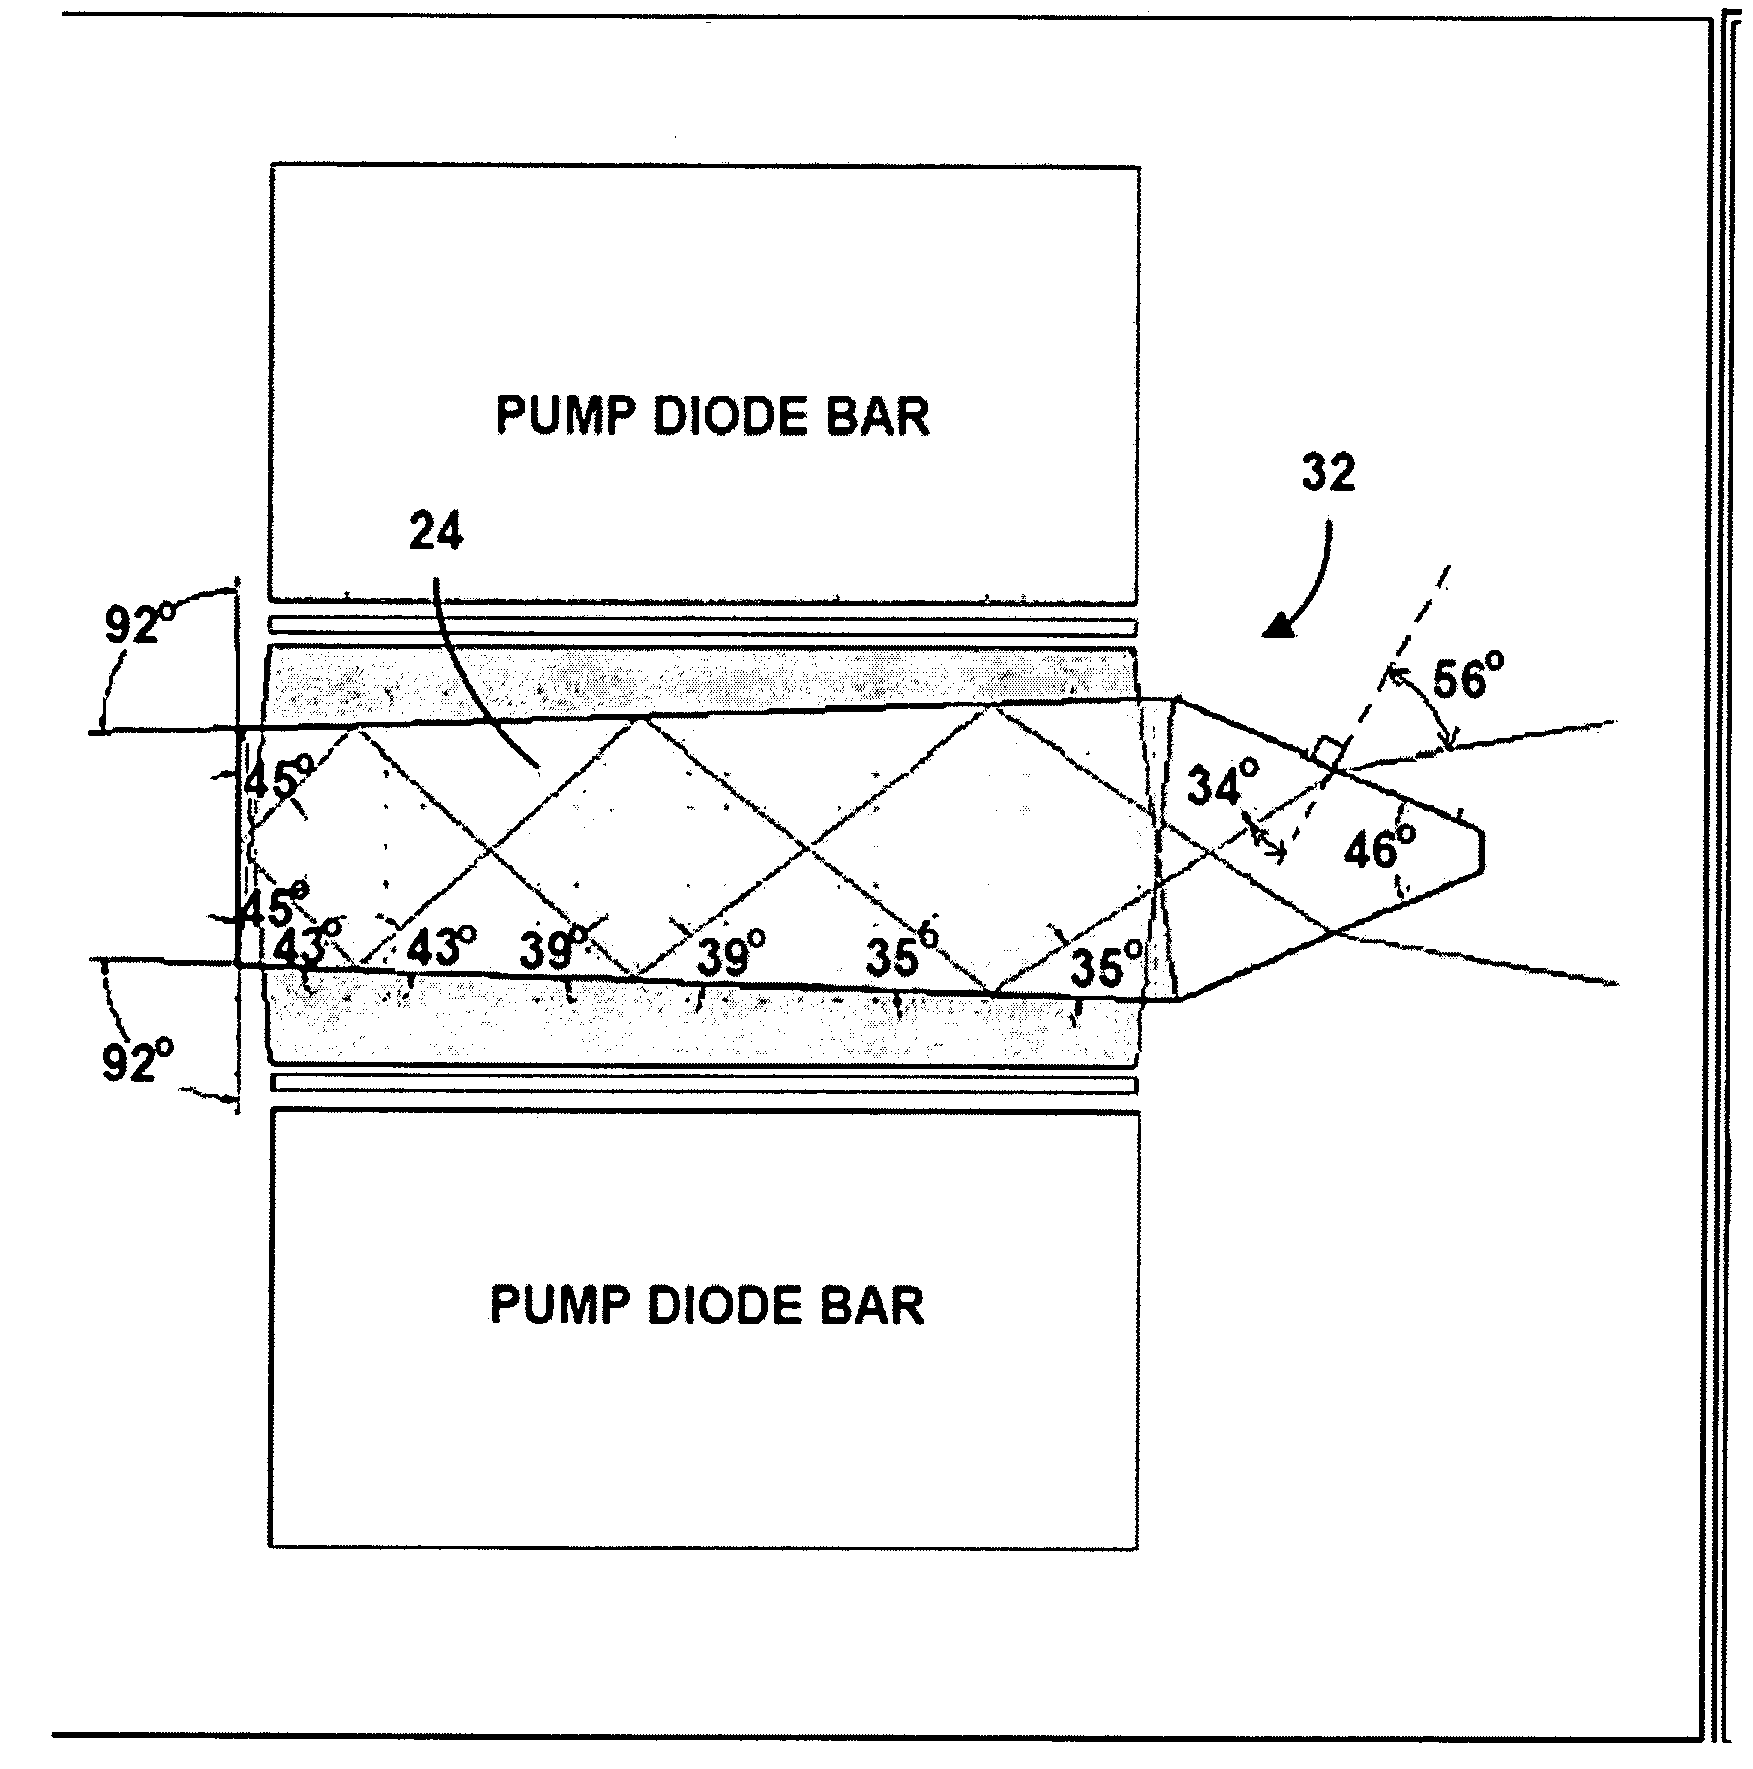 Slab laser amplifier with parasitic oscillation suppression